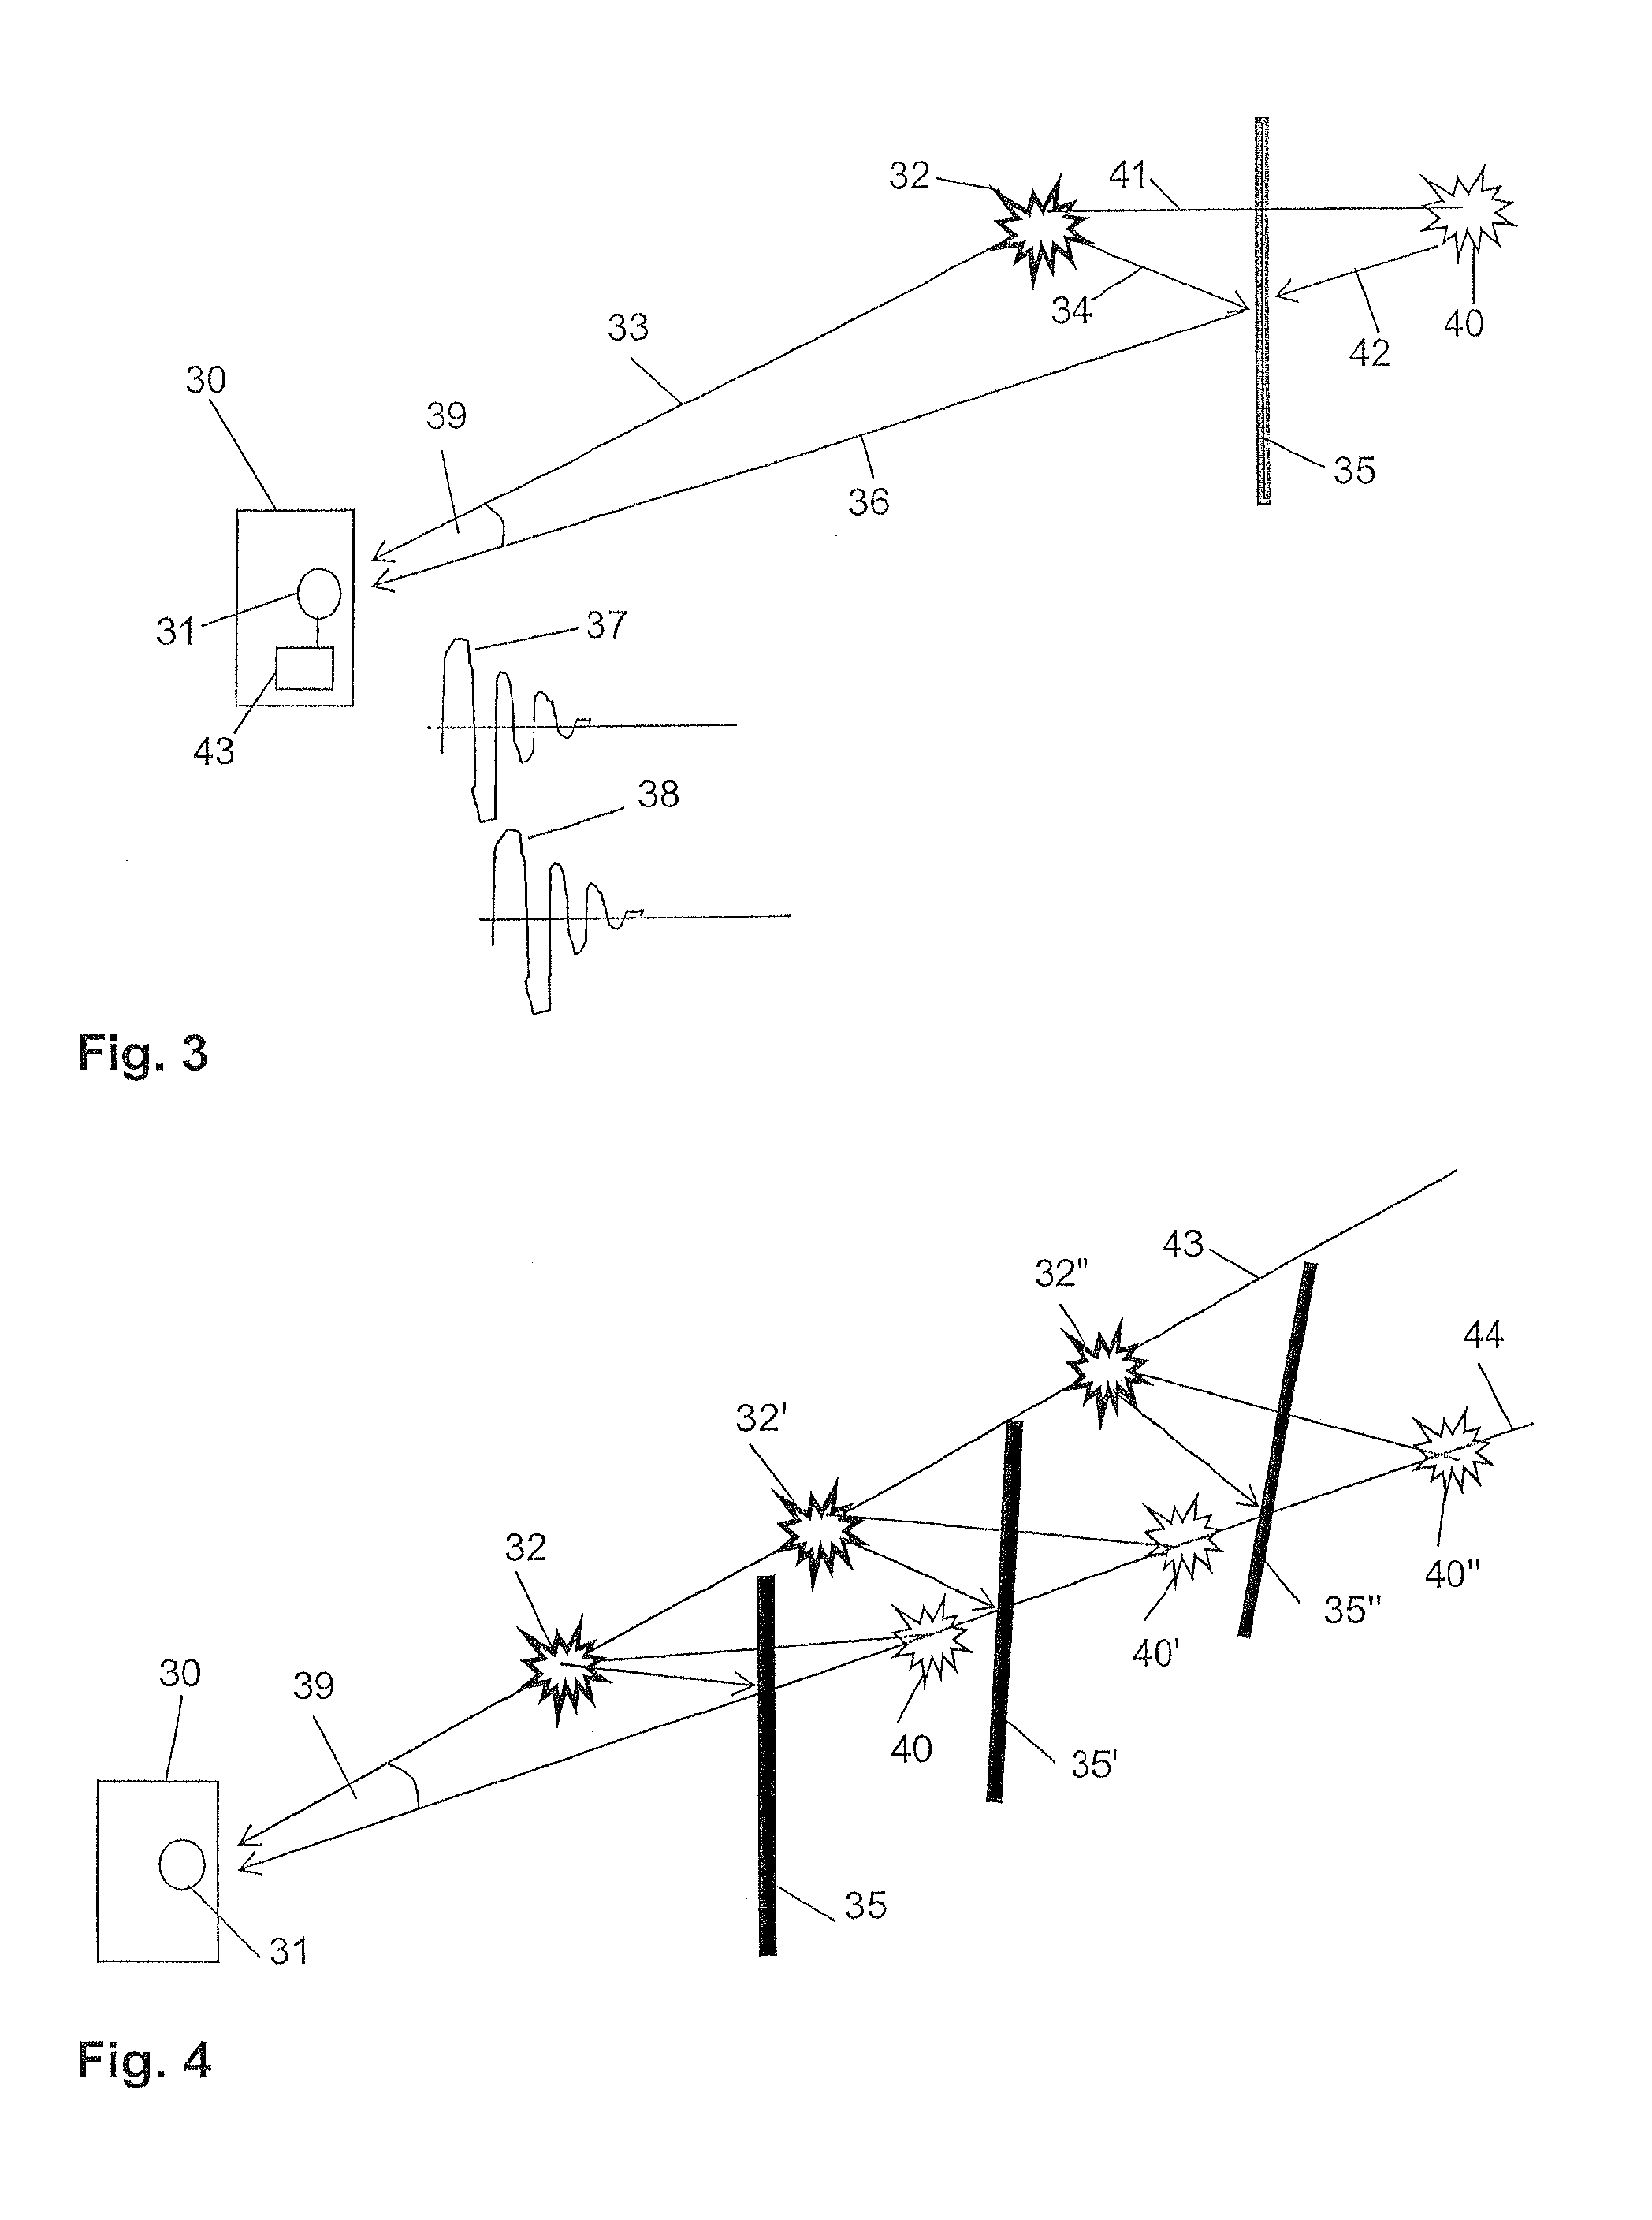 Method for Determining an Acoustic Property of an Environment